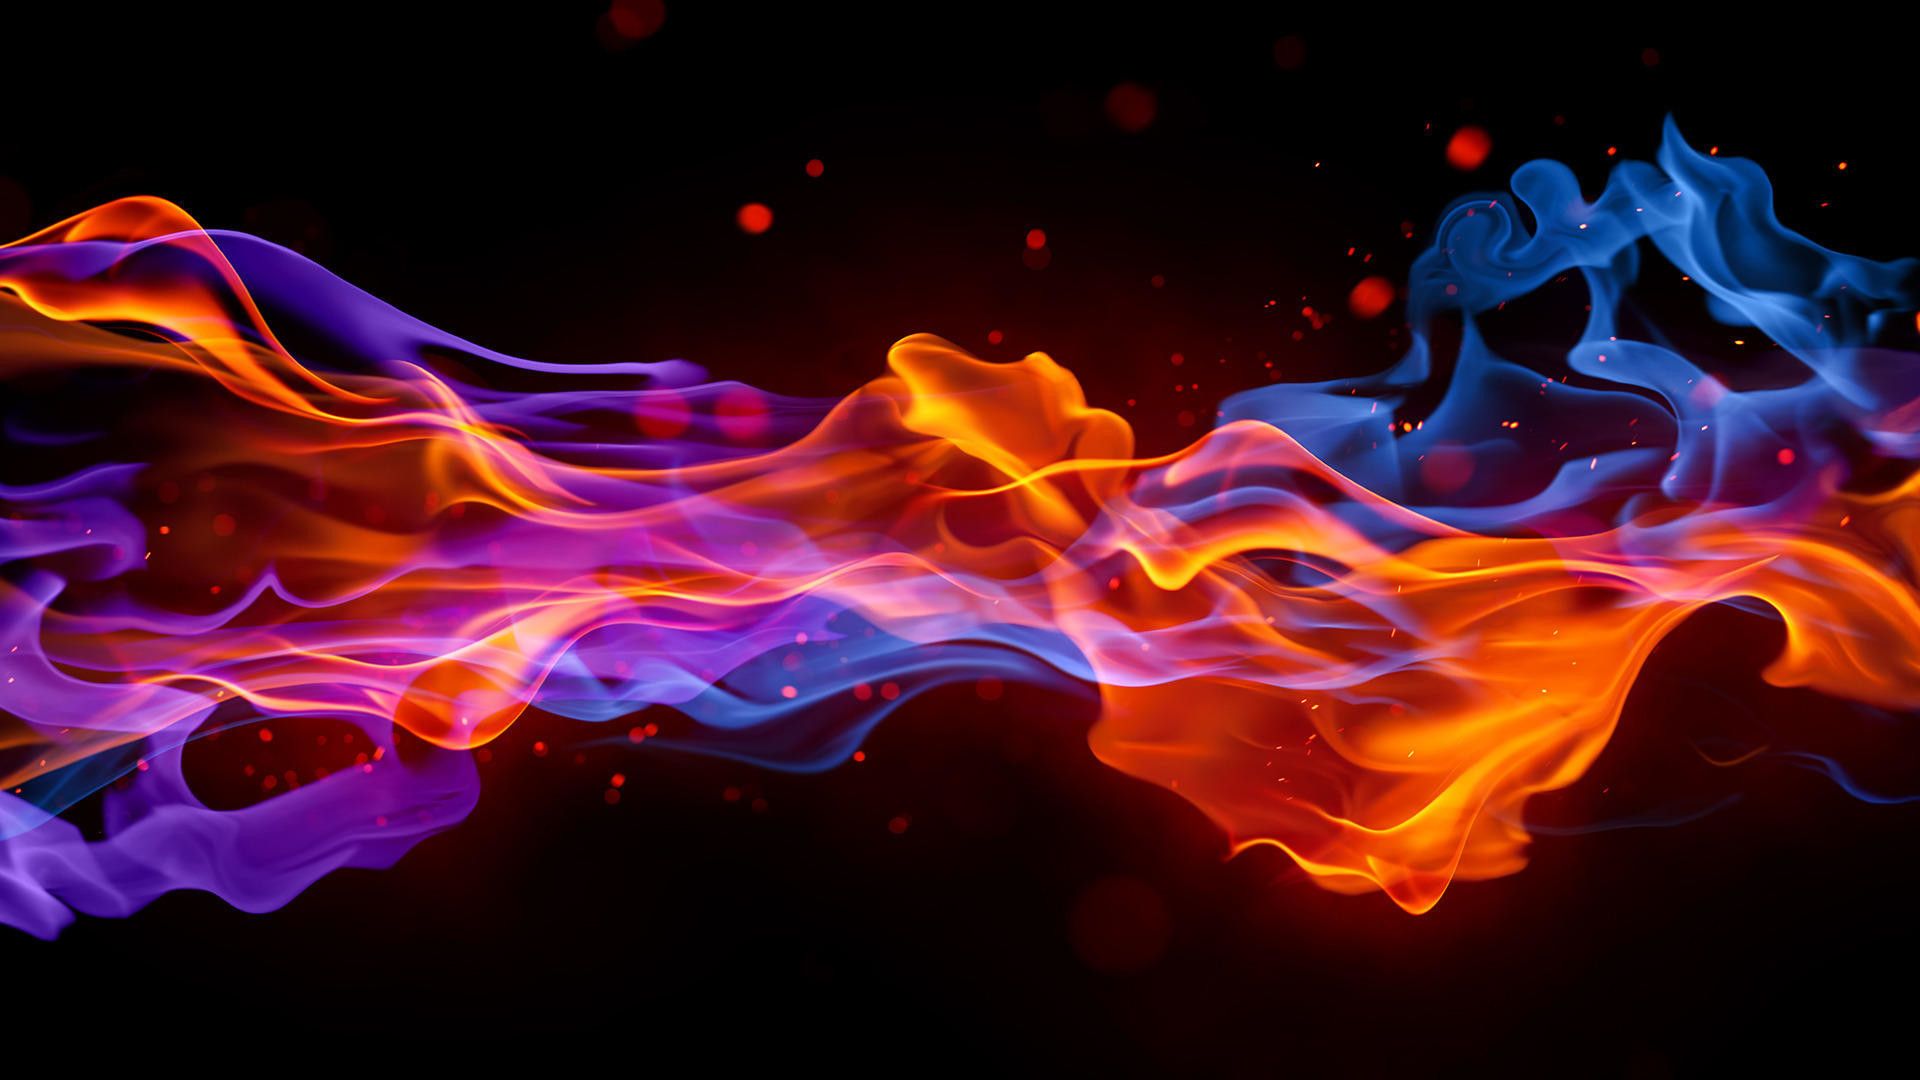 67+ Awesome Fire Wallpapers